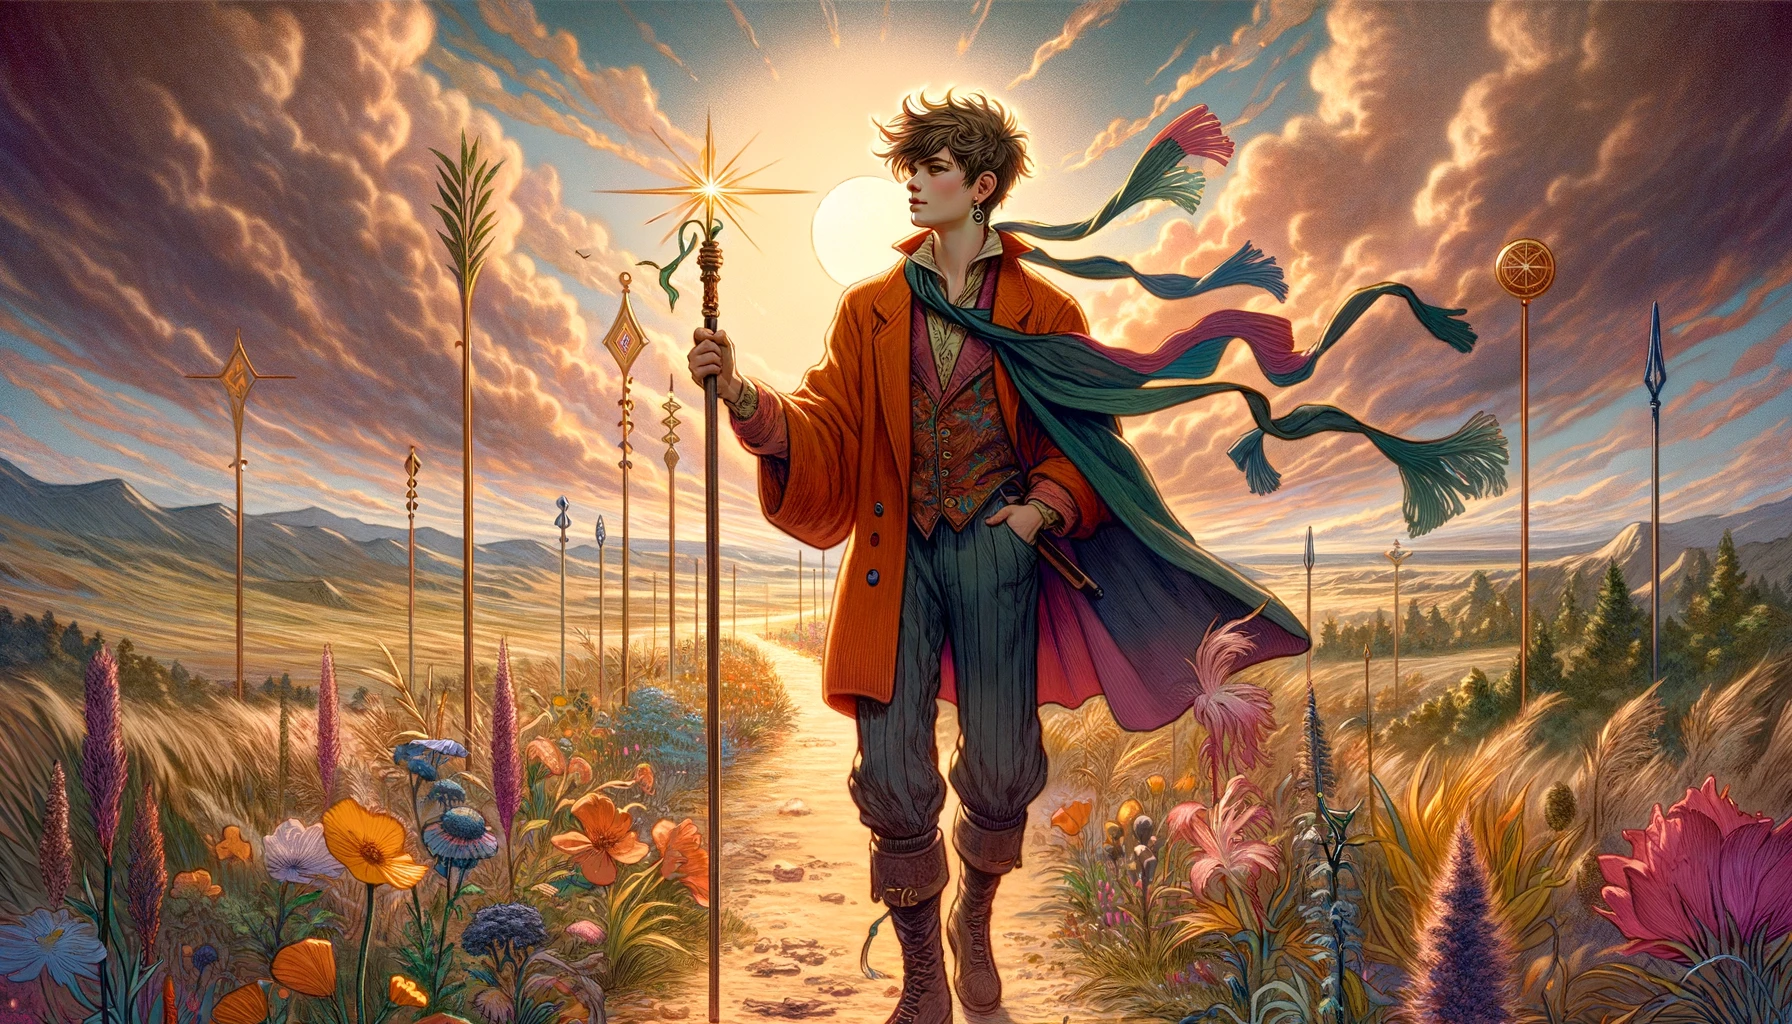 The image depicts a youthful, energetic individual brimming with ideas, creativity, and a thirst for adventure. Set against a landscape bursting with life and possibility, the scene embodies the character's potential for growth and the spark of new beginnings. The image exudes energy, enthusiasm, and optimism, reflecting the essence of this tarot figure.